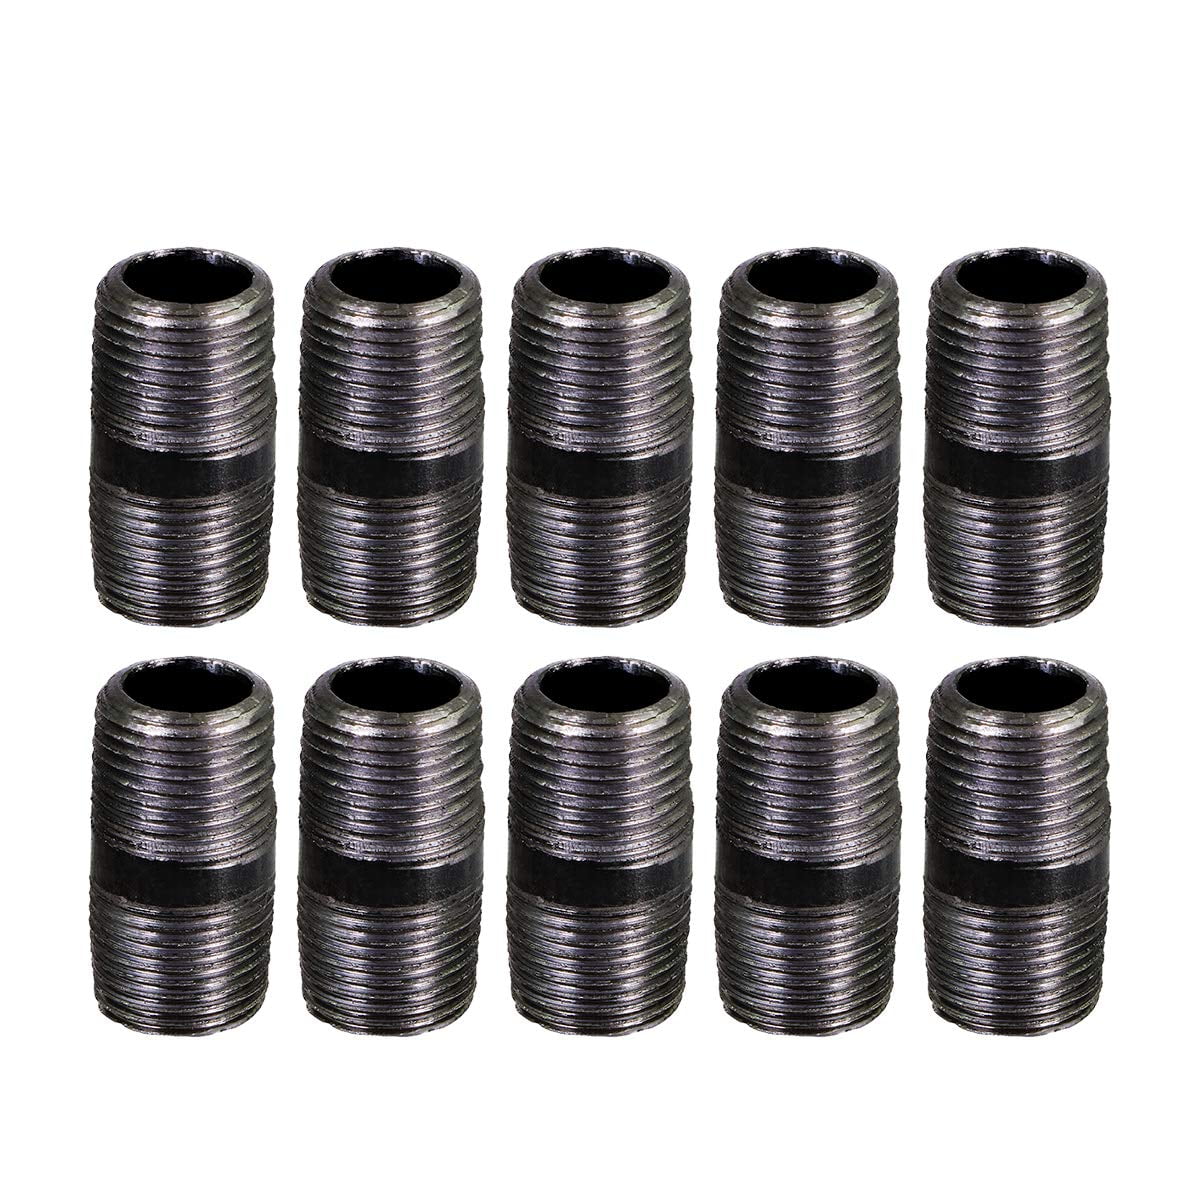 1/4" NPT x 1.5" Long Male Pipe Nipples Threaded Brass Fittings Connectors 5 Pack 